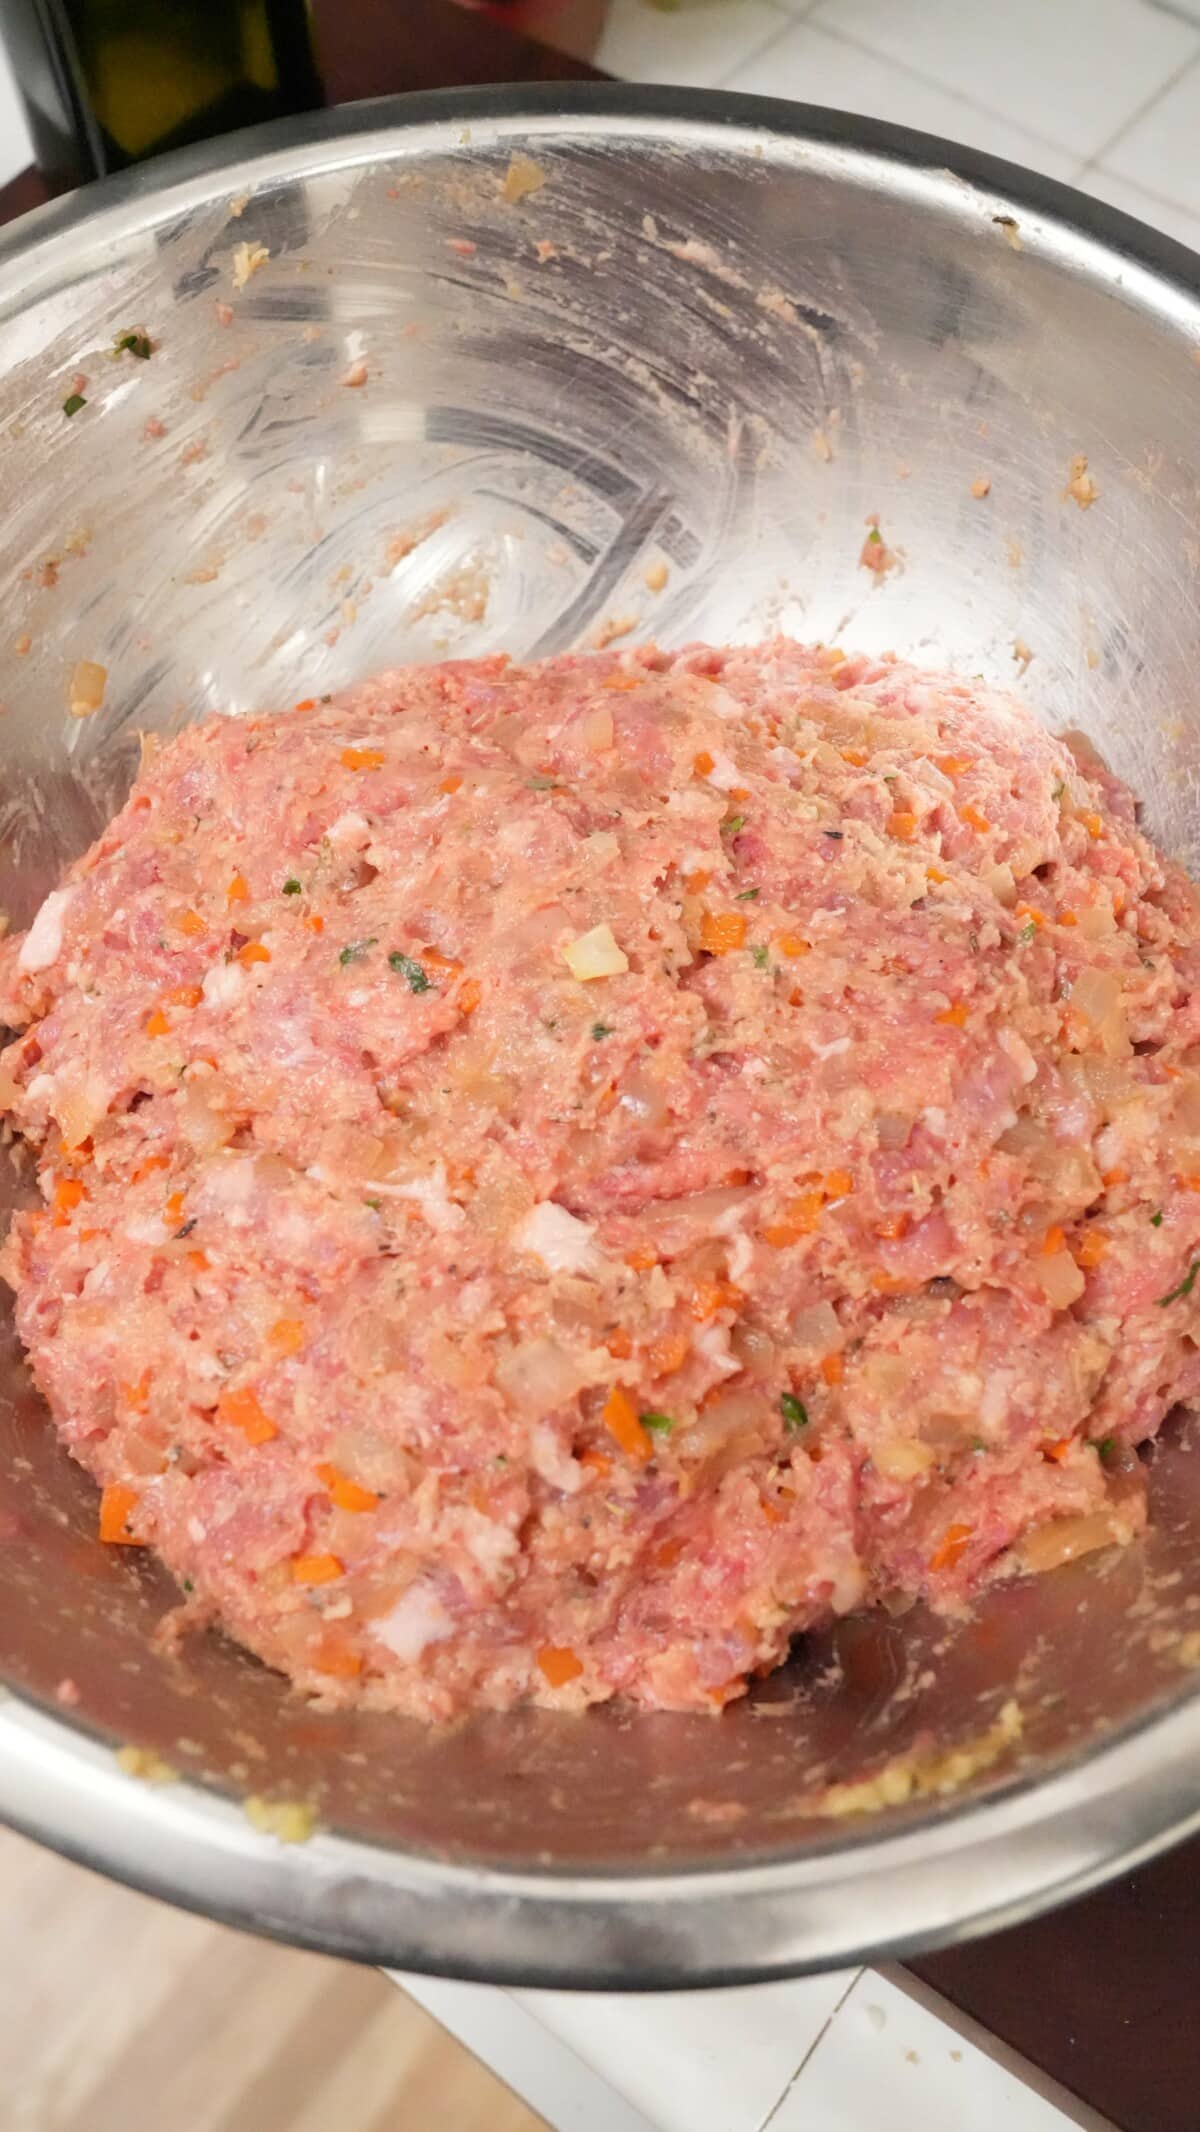 The meatloaf mixture mixed in a metal bowl.